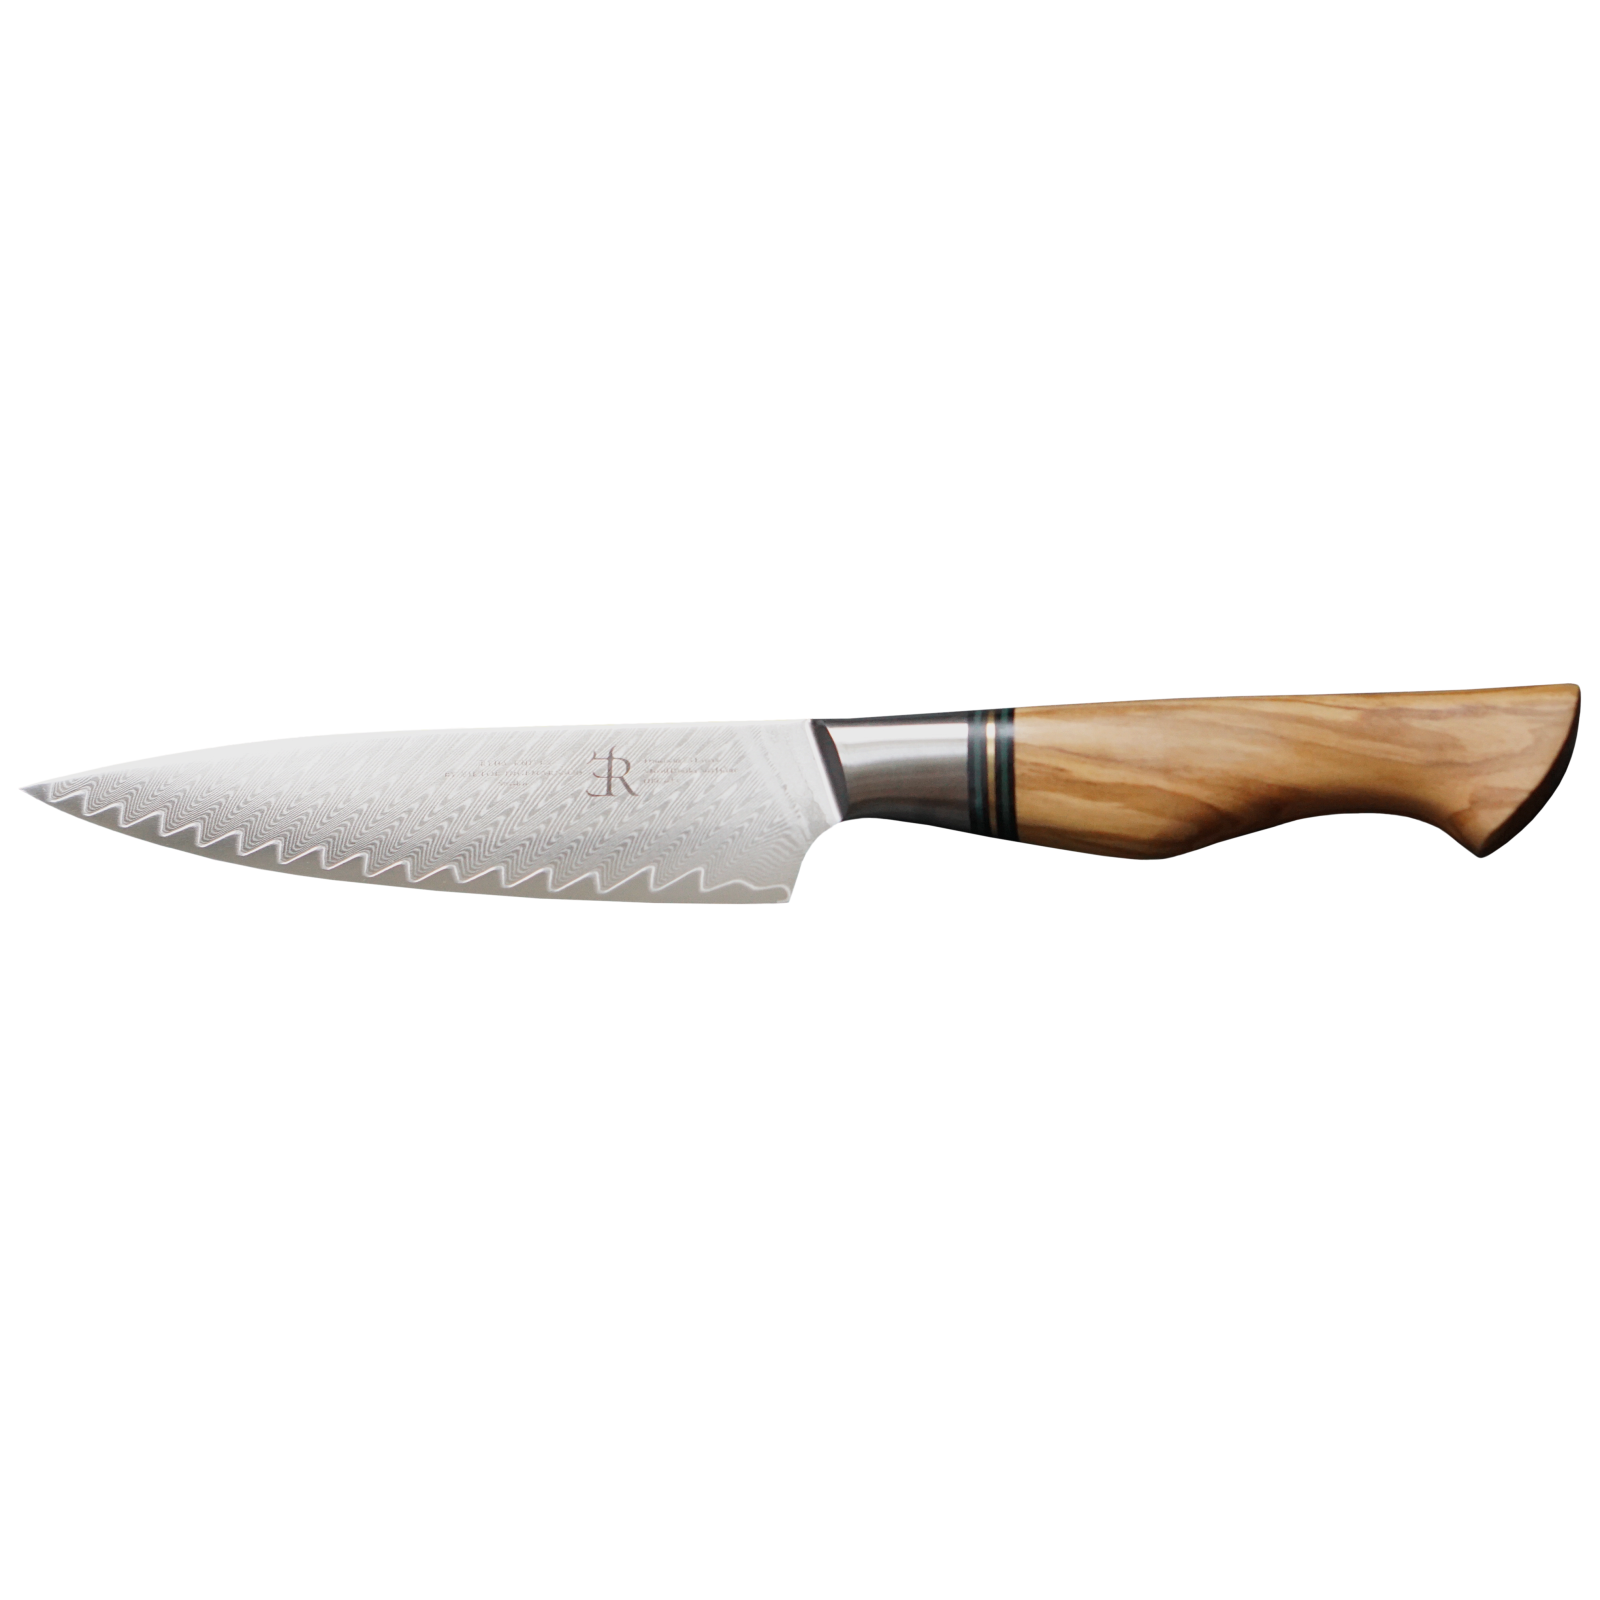 St650-utility-knife.png